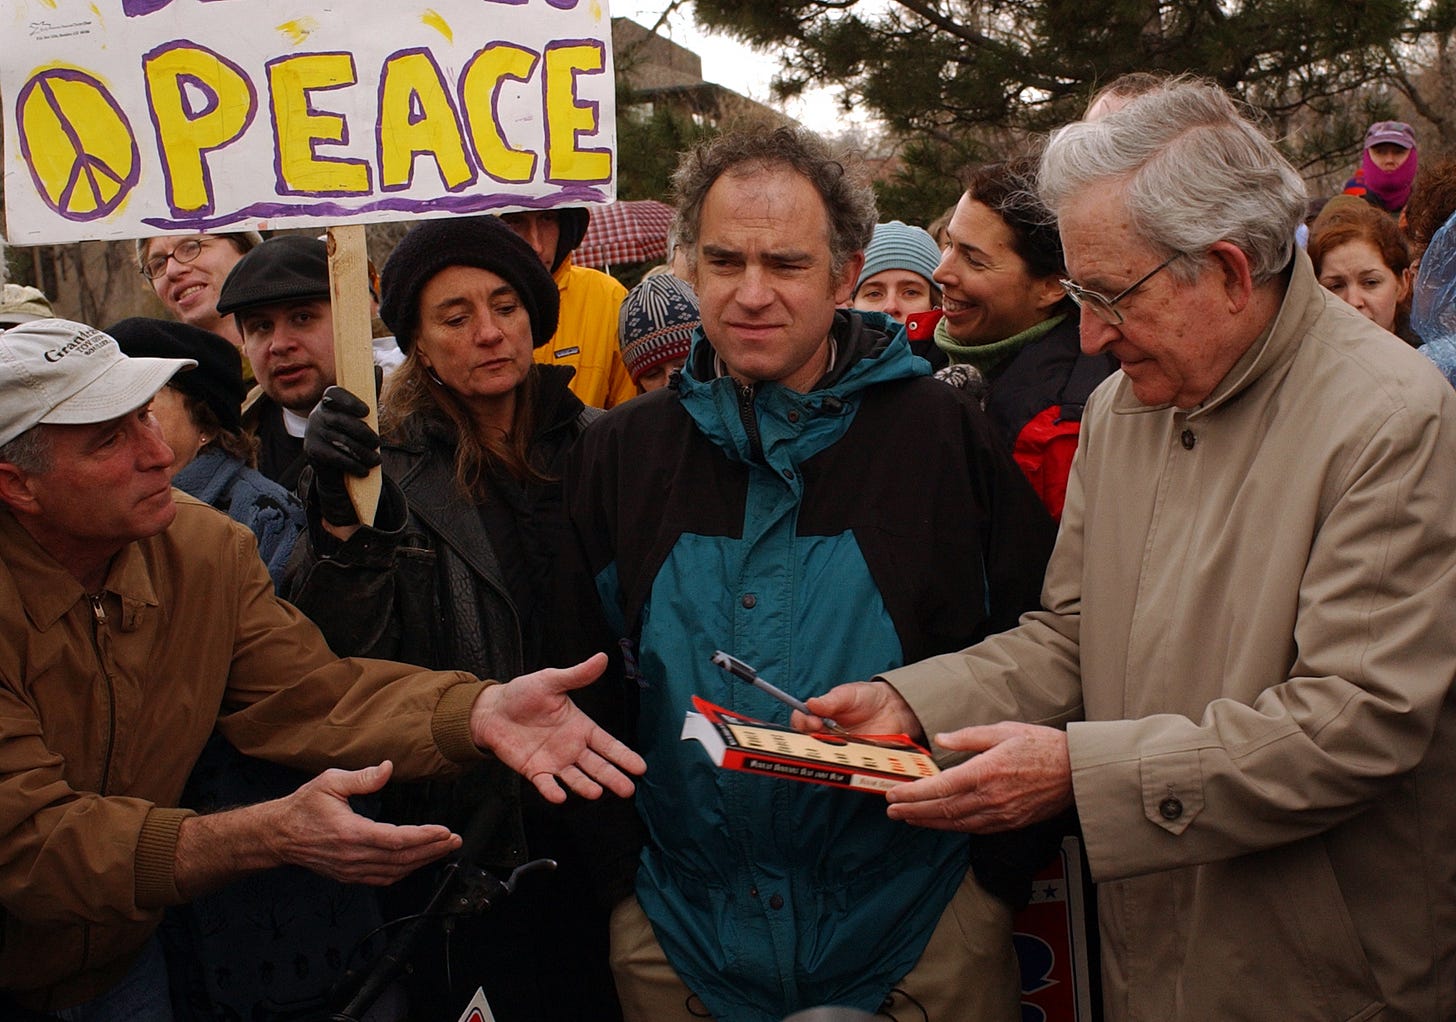 Will Toor & Noam Chomsky in 2003. (Photo: Getty Images)